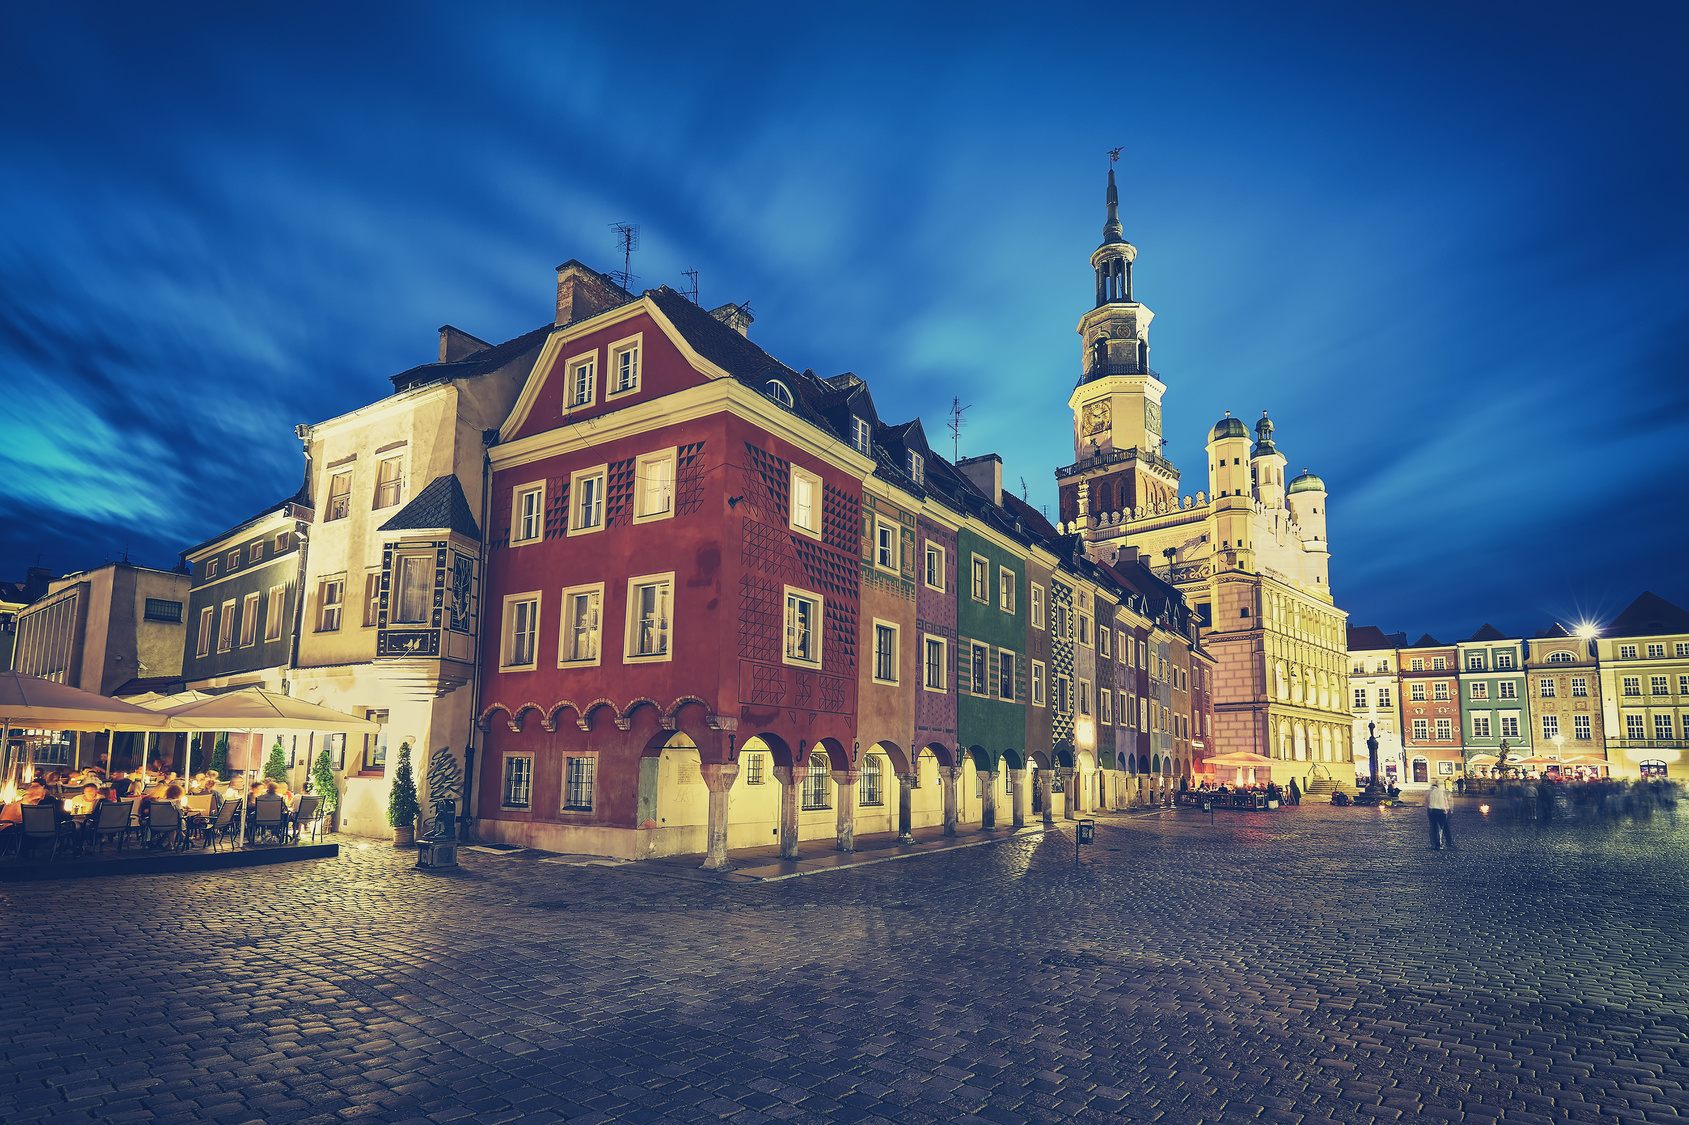 Retro stylized Old Market Square in Poznan at night, long exposure effect, Poland.